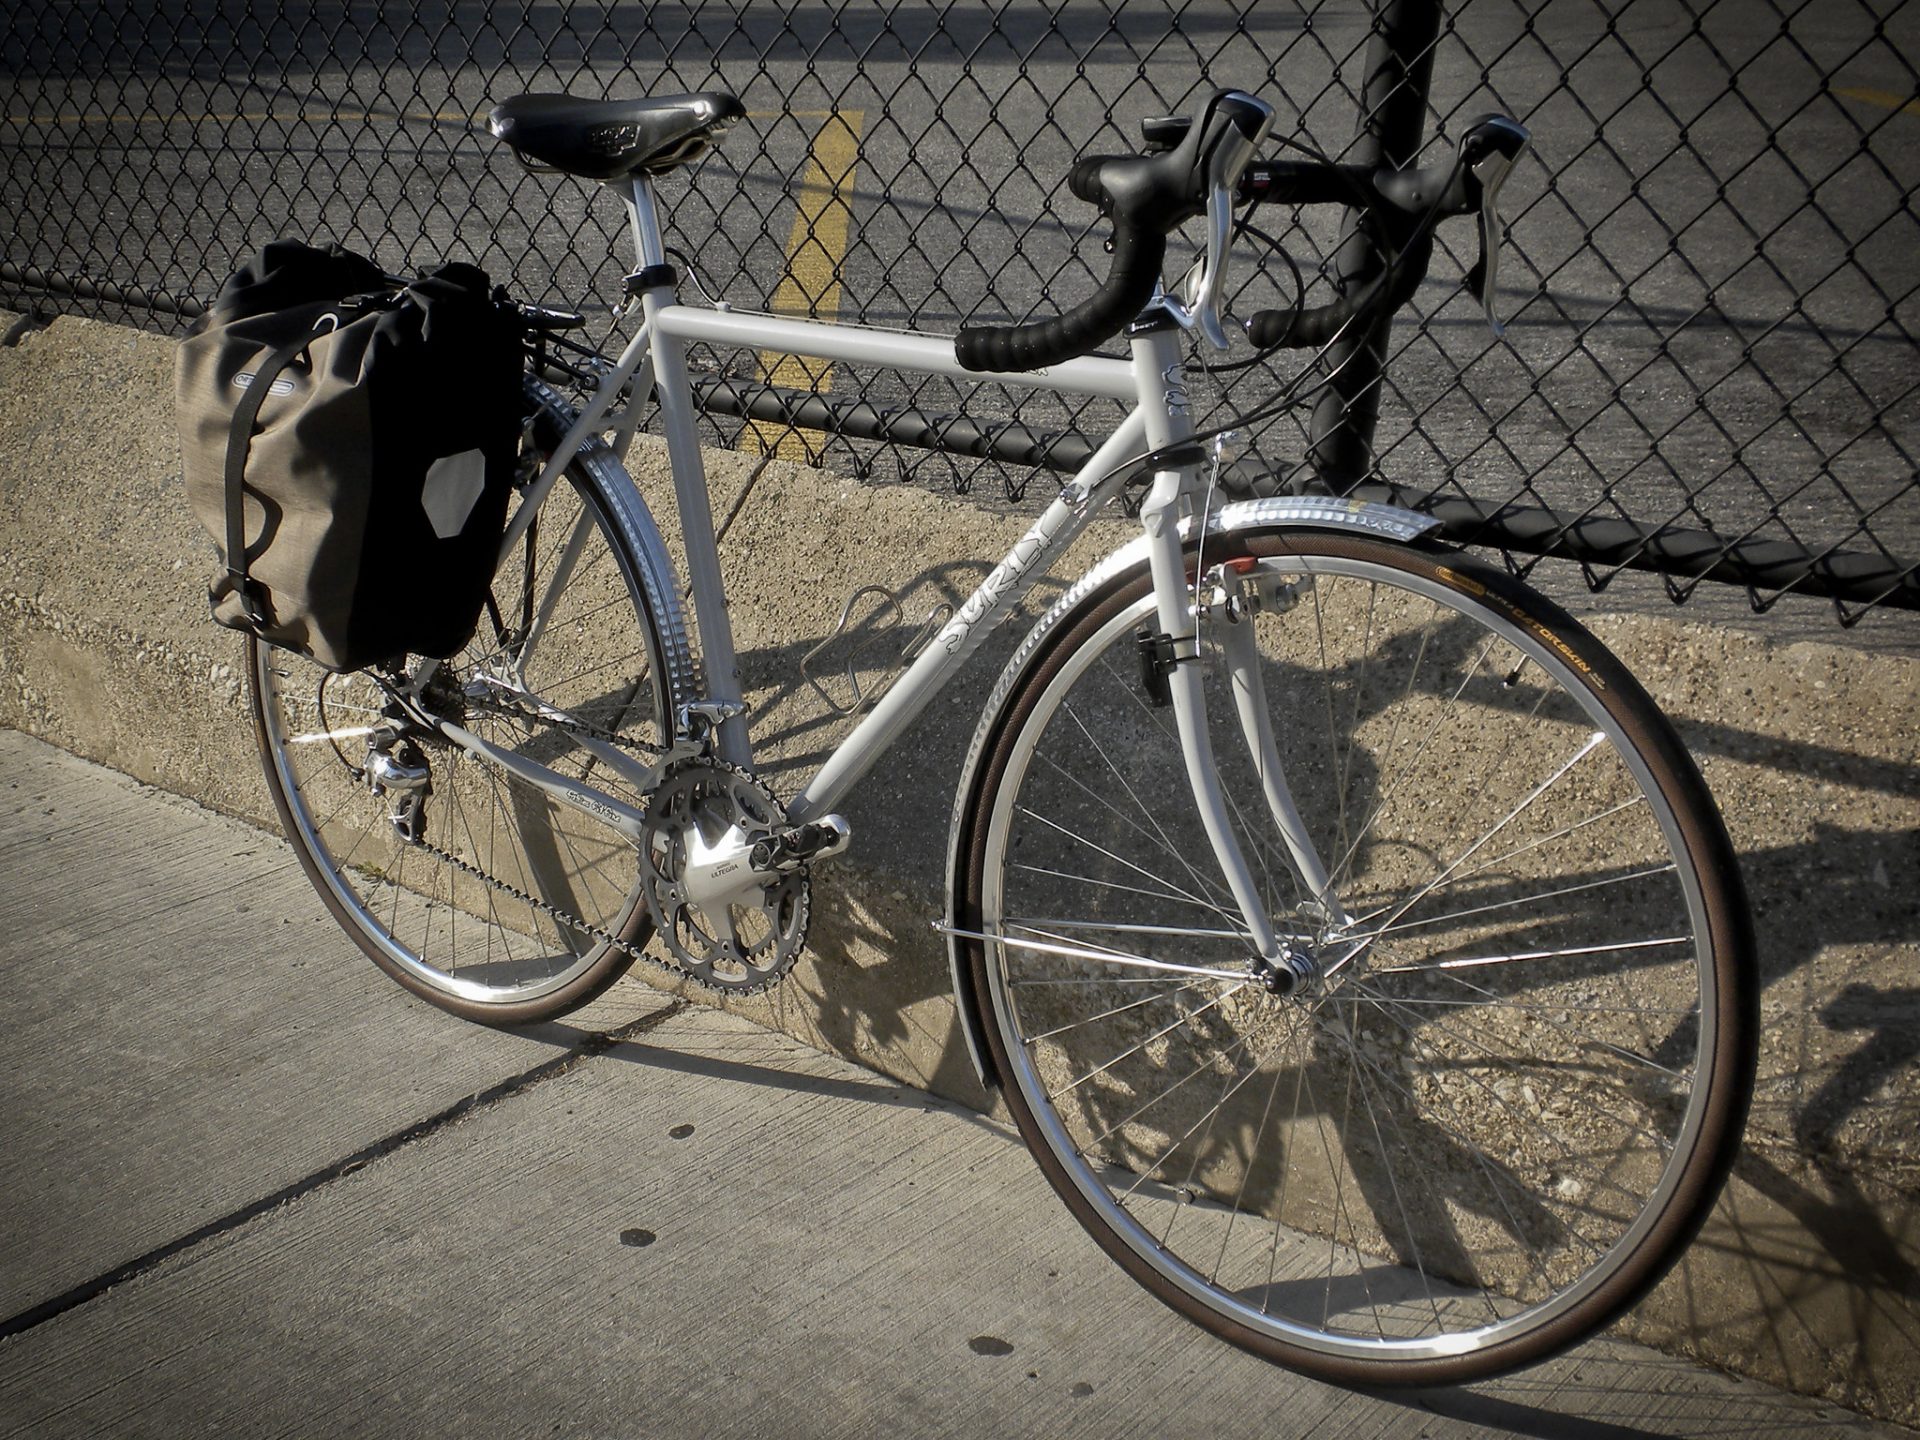 A white Surly Cross-Check leaning against a fence. It is built up with road gearing, a drop handlebar, full length hammered metal mudguards, a pannier rack and a Brooks saddle. 